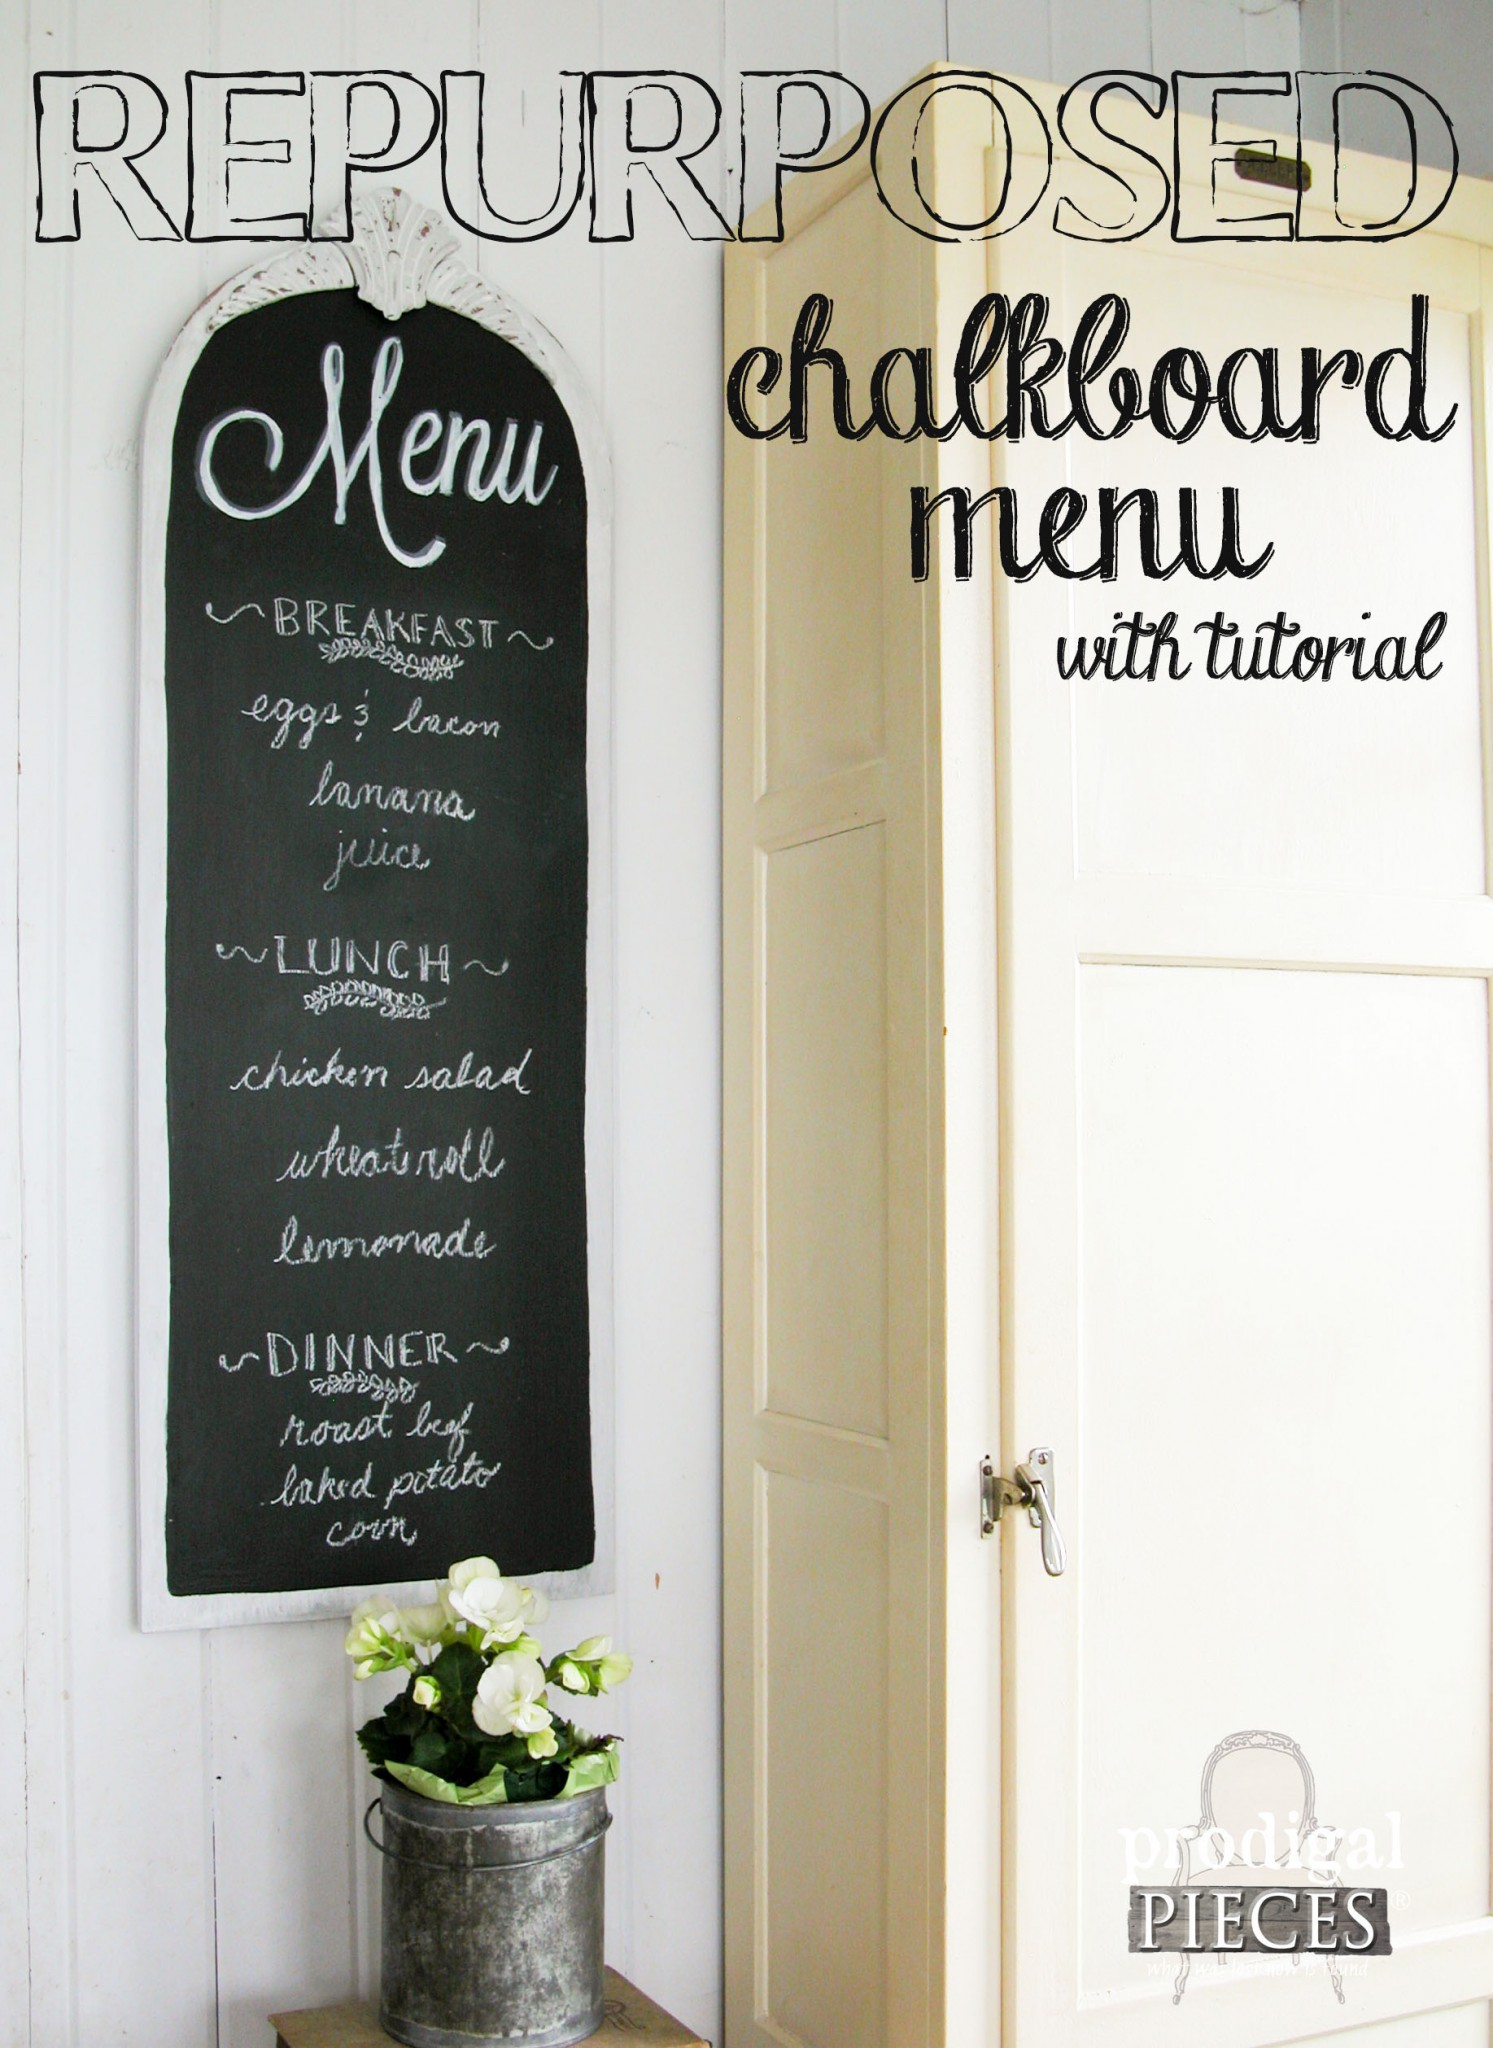 Create Your Own Repurposed Chalkboard Menu with Prodigal Pieces | www.prodigalpieces.com